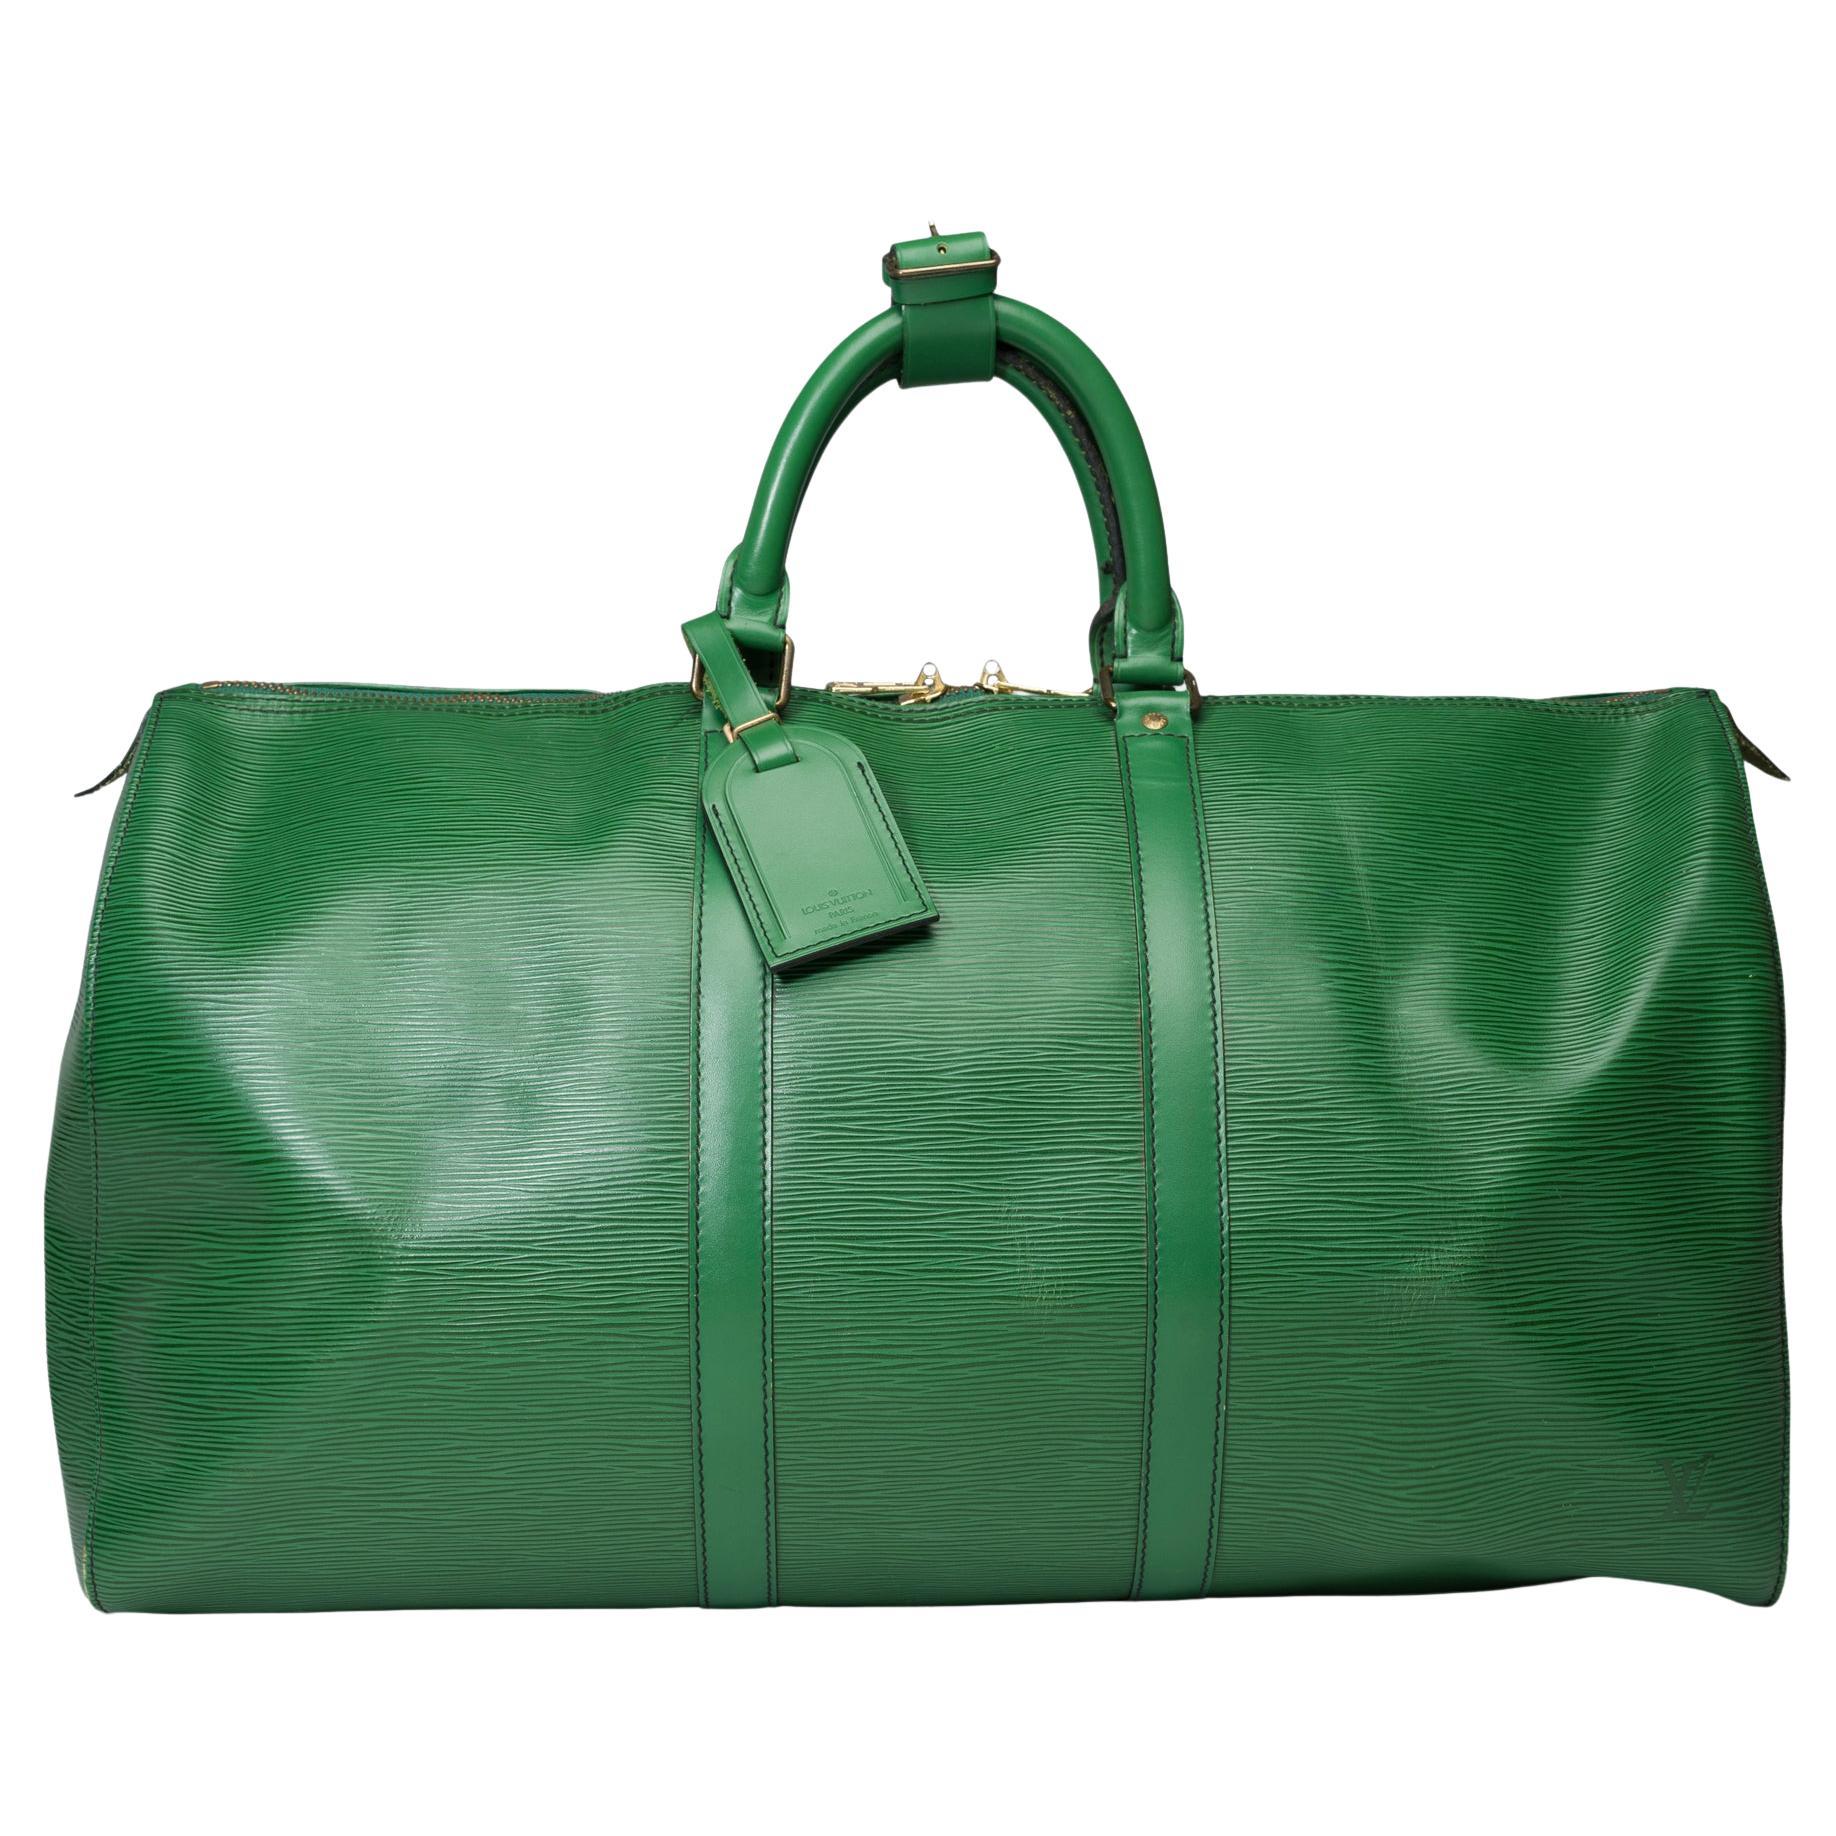 Louis Vuitton Keepall 50 Travel bag in Green épi leather, GHW